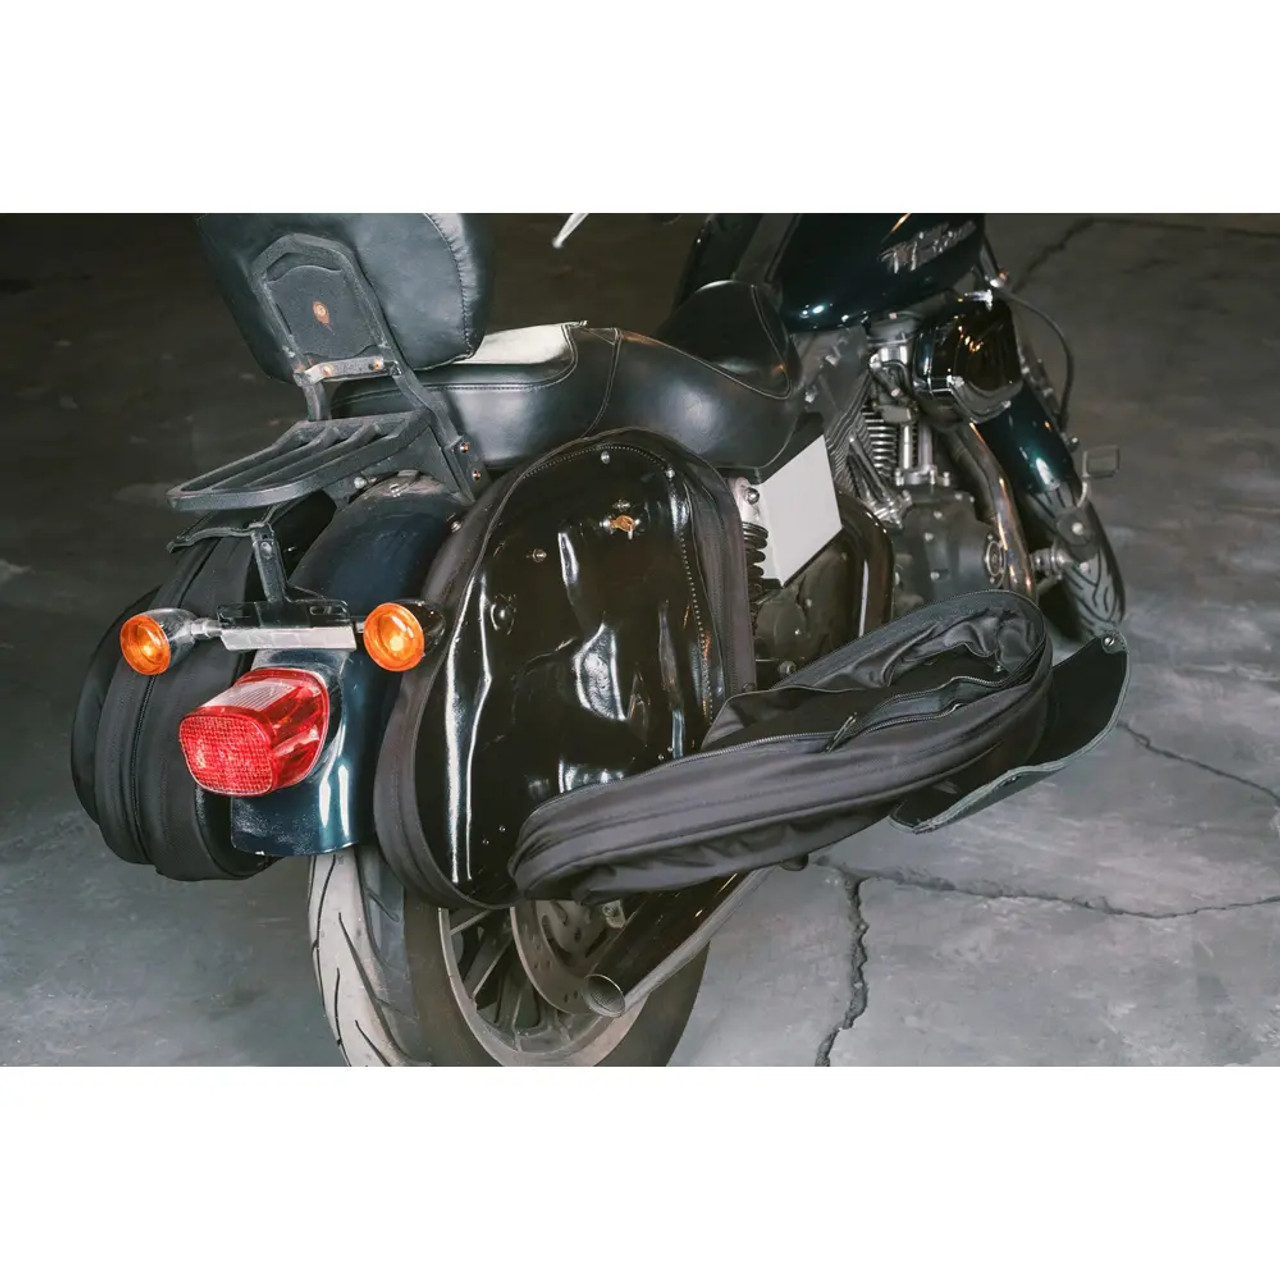 Leather Pros Saddlebags for Harley Dyna | Get Lowered Cycles